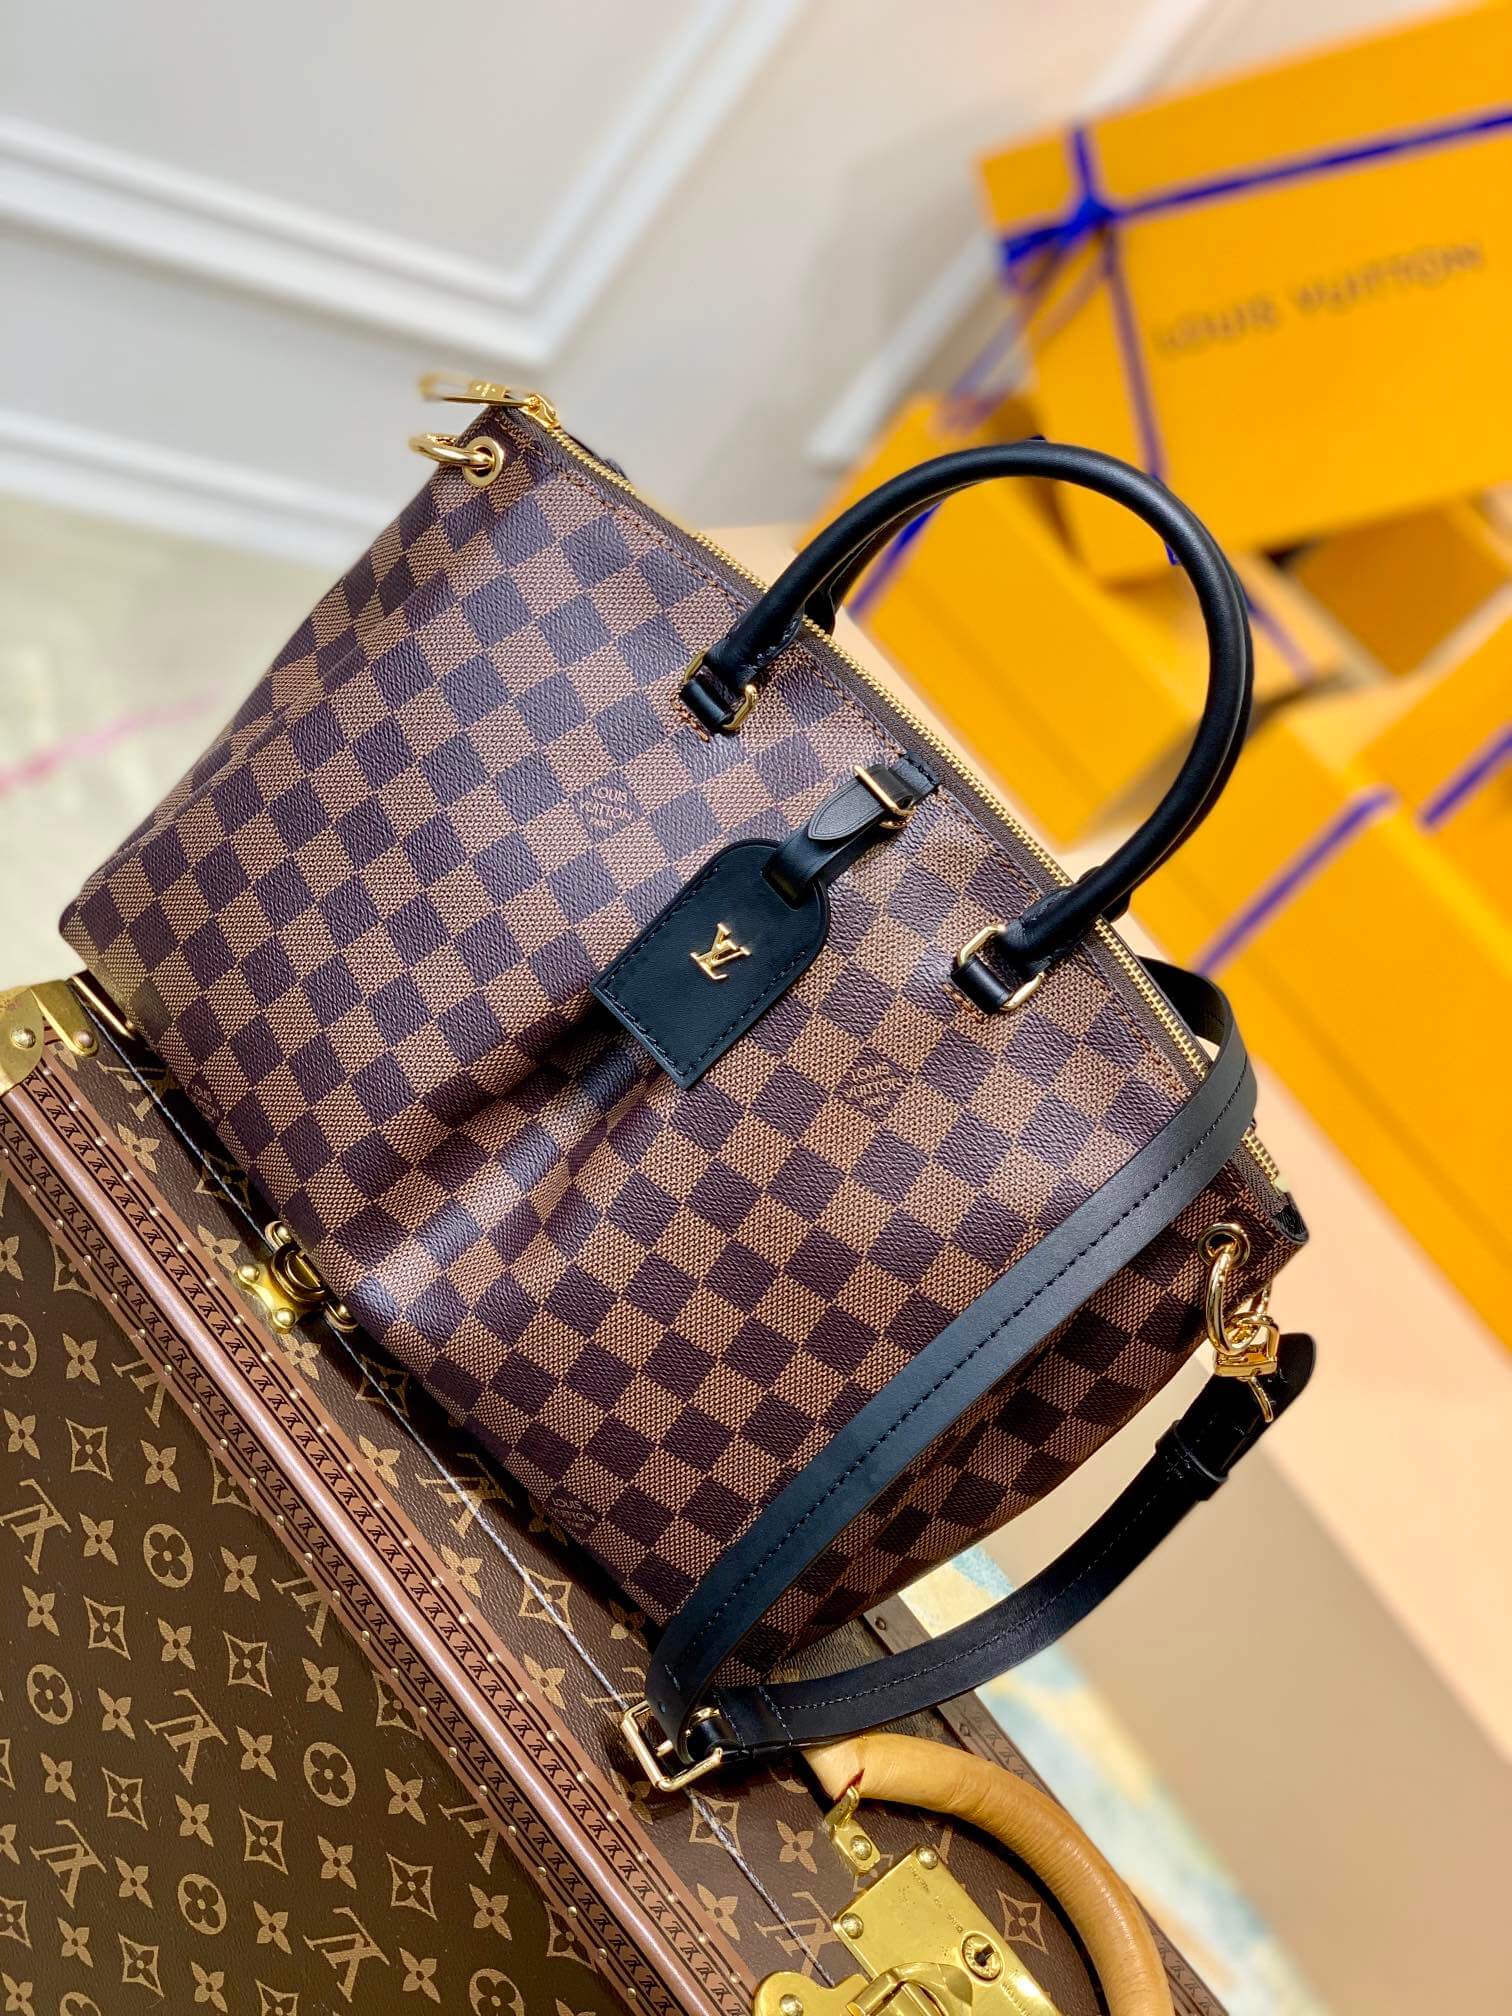 Authentic LOUIS VUITTON Damier Odeon Tote MM N45283 Bag #246-000-379-0342